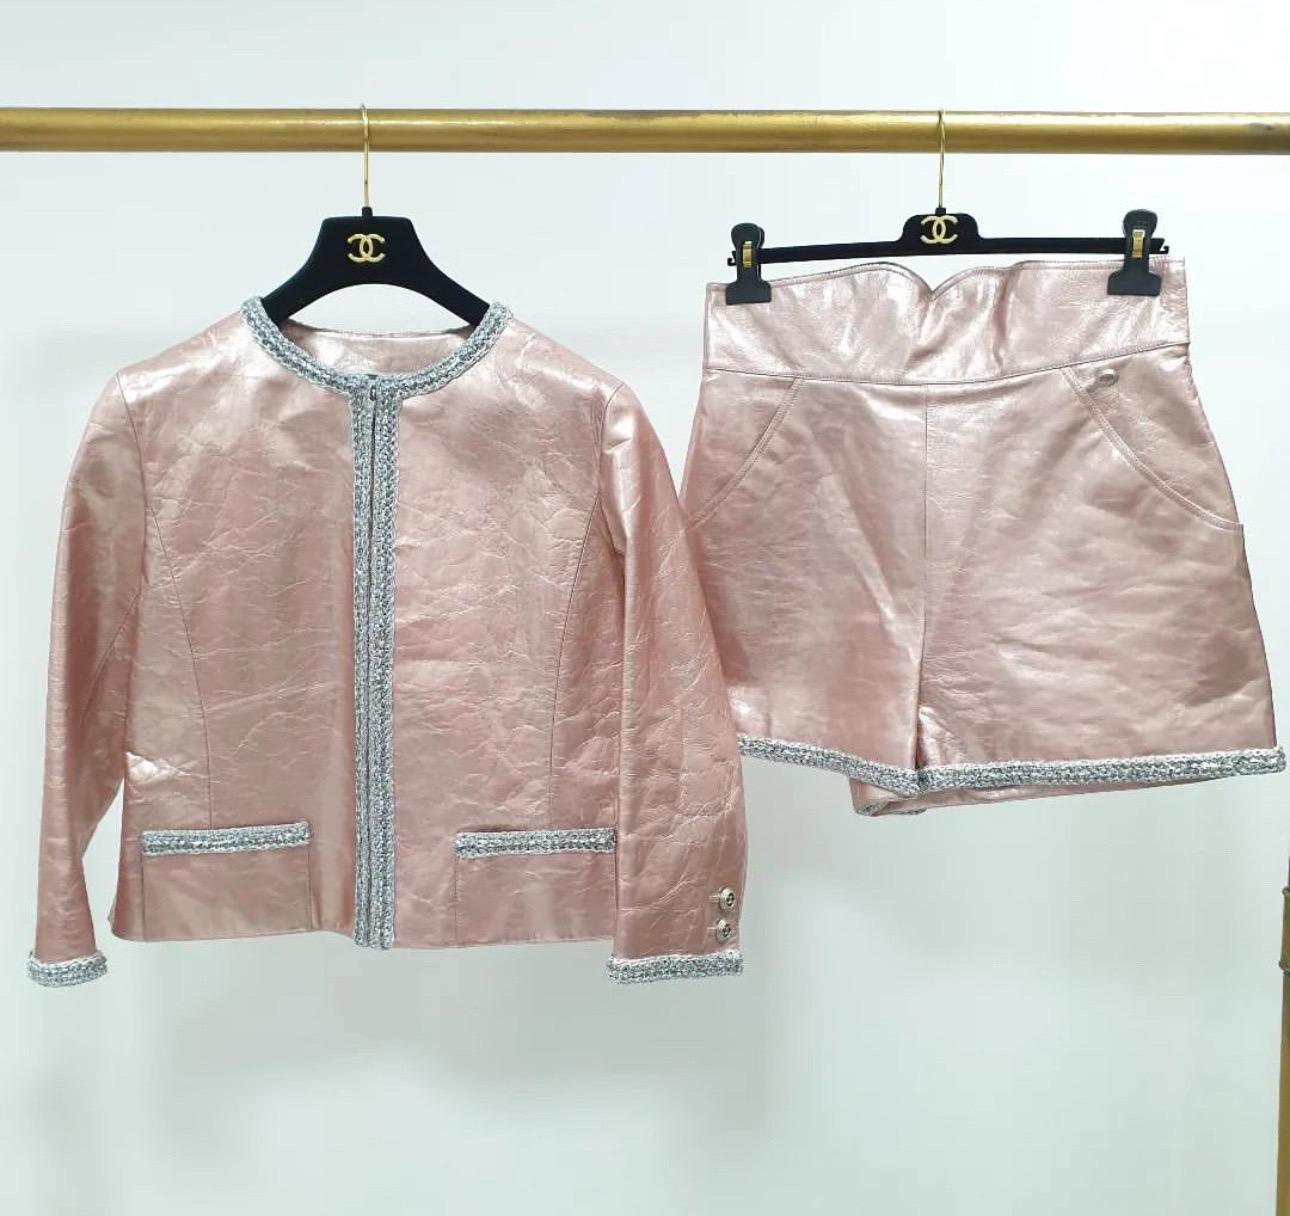 2 pieces set
This is a collarless leather jacket by Chanel and shorts, from their Spring 2020 collection. The jacket has a zip-front closure and three-quarter length sleeves with two silver metal logo buttons. This jacket features a silver